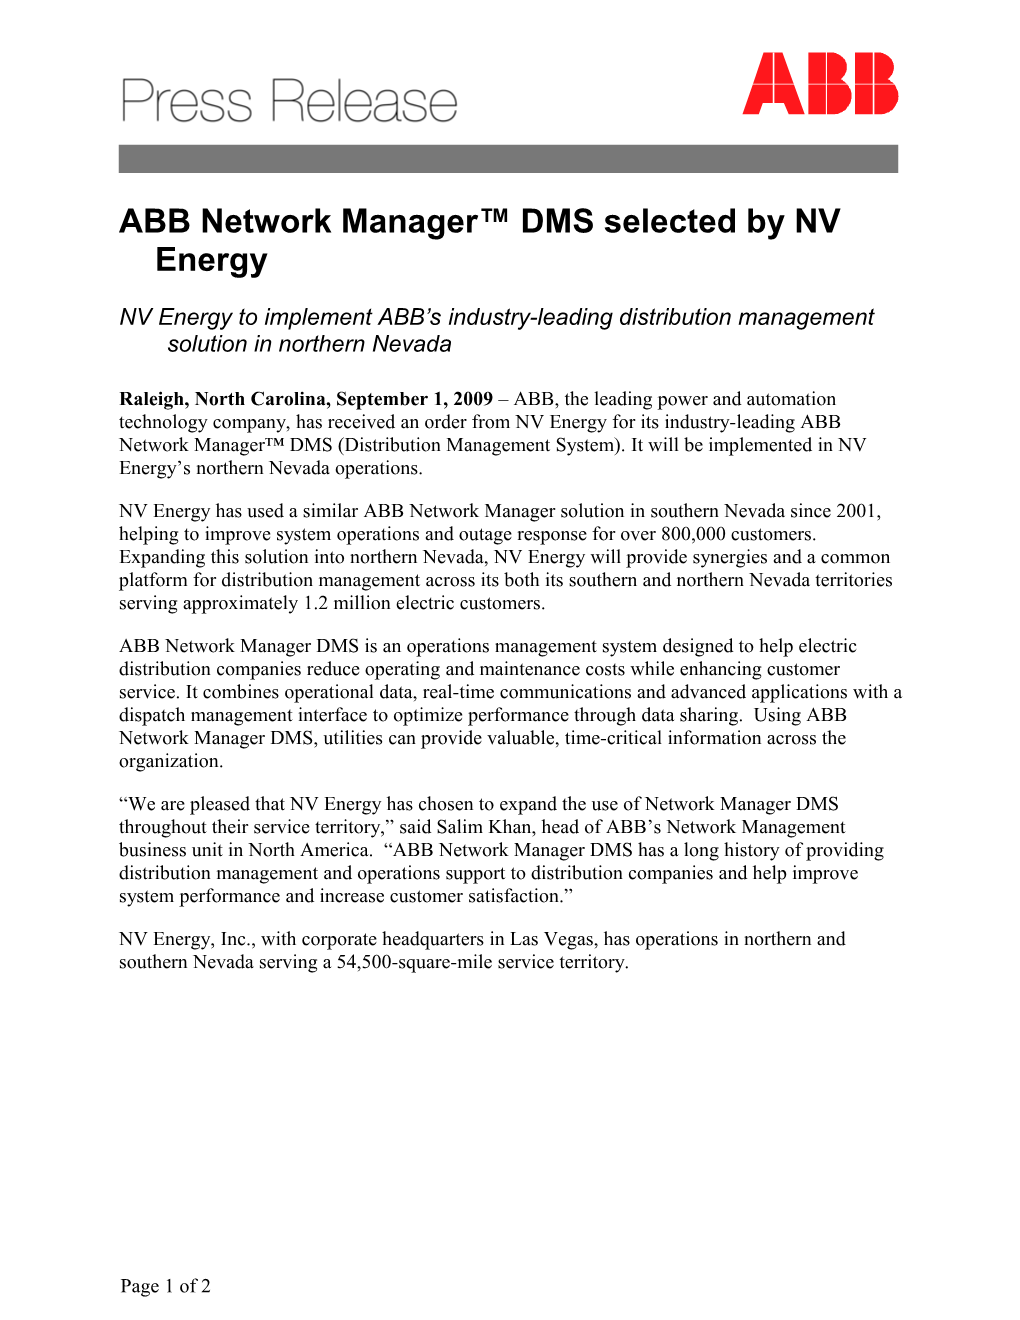 ABB Network Manager DMS Selected by NV Energy